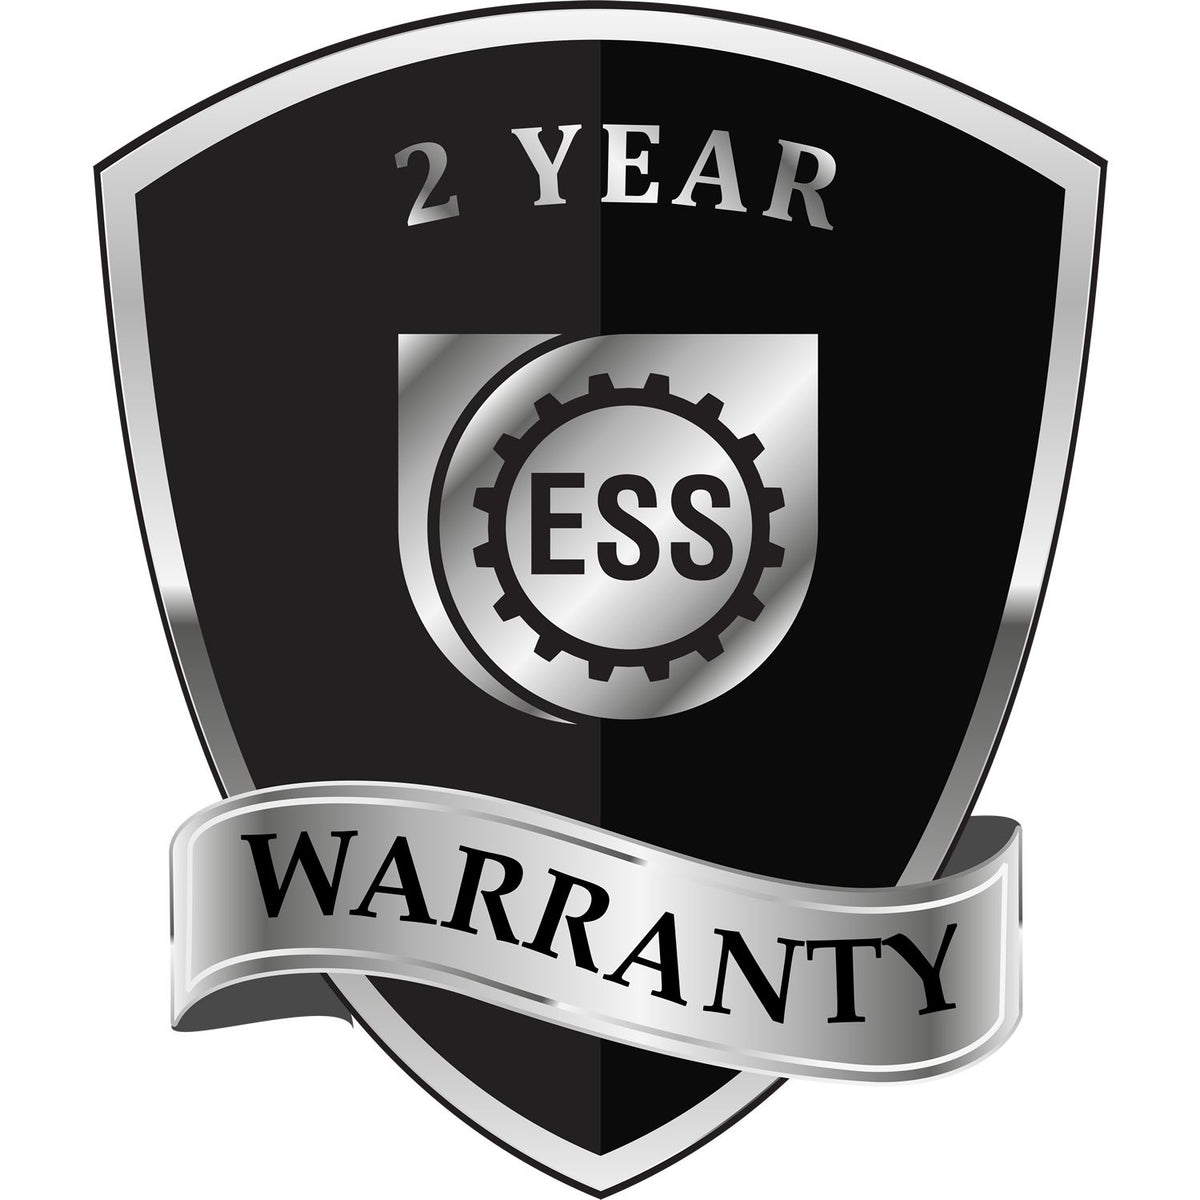 A black and silver badge or emblem showing warranty information for the Heavy Duty Cast Iron Mississippi Geologist Seal Embosser